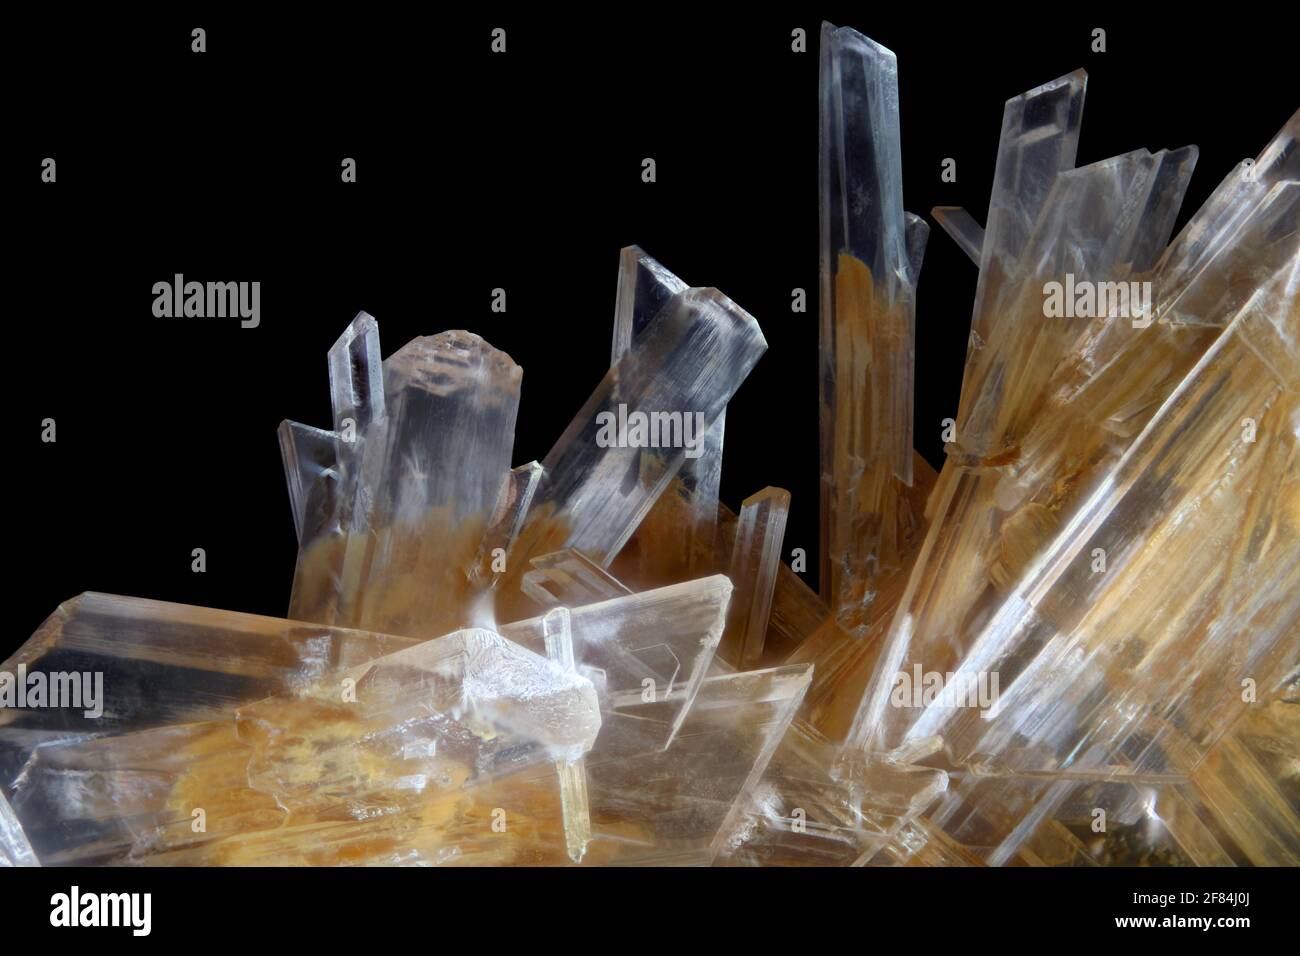 Gypsum crystals exposed against a black background Stock Photo